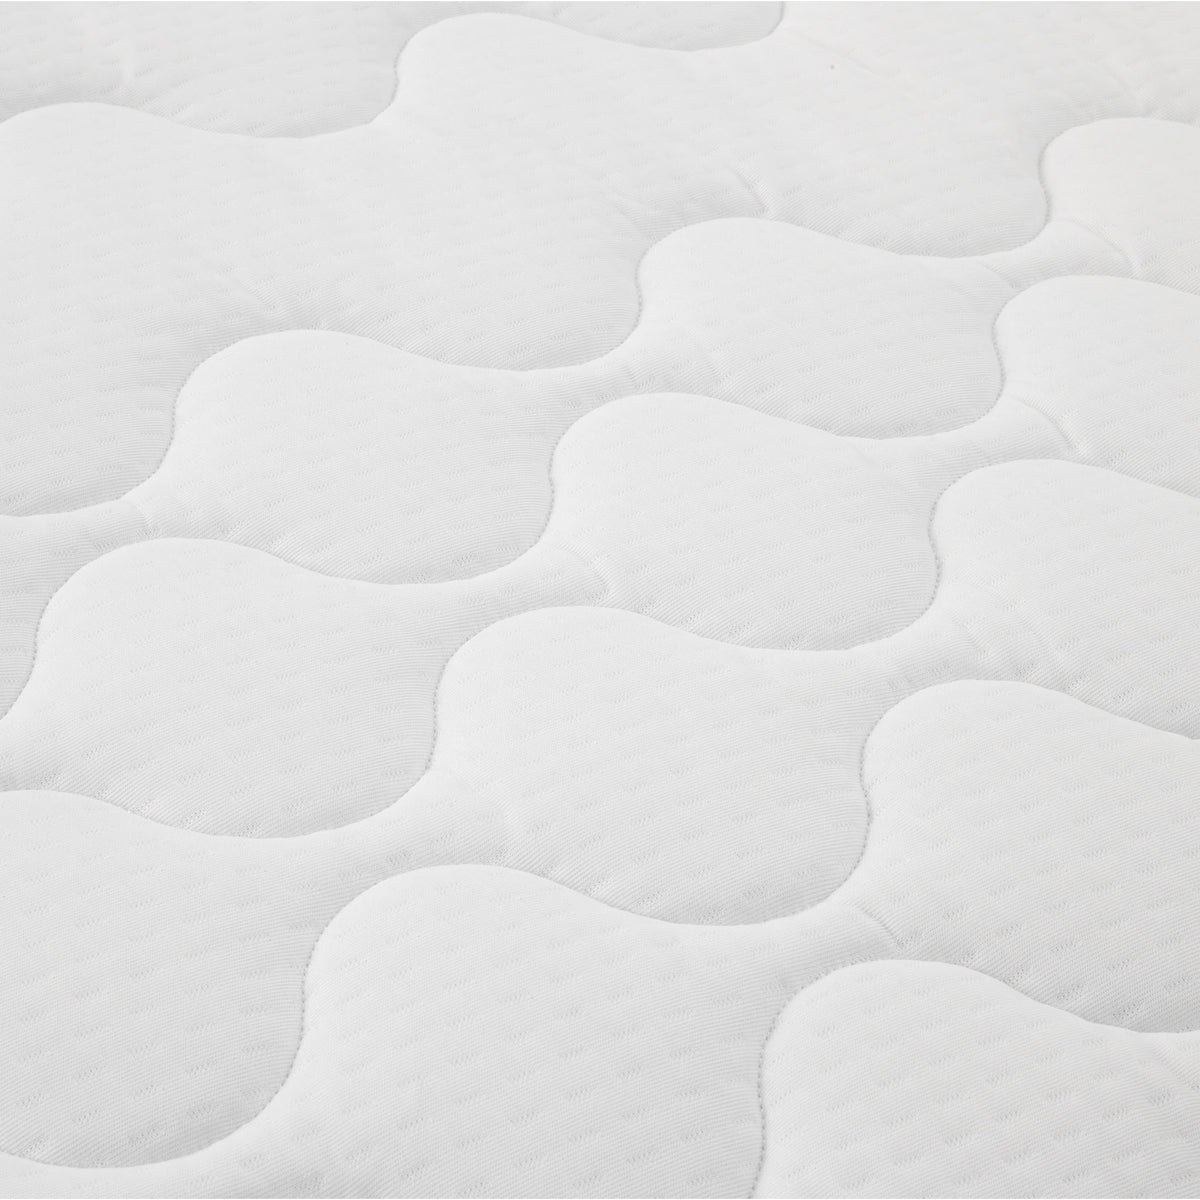 Roseland Sleep Comfort Quilted Mattress quilted close up